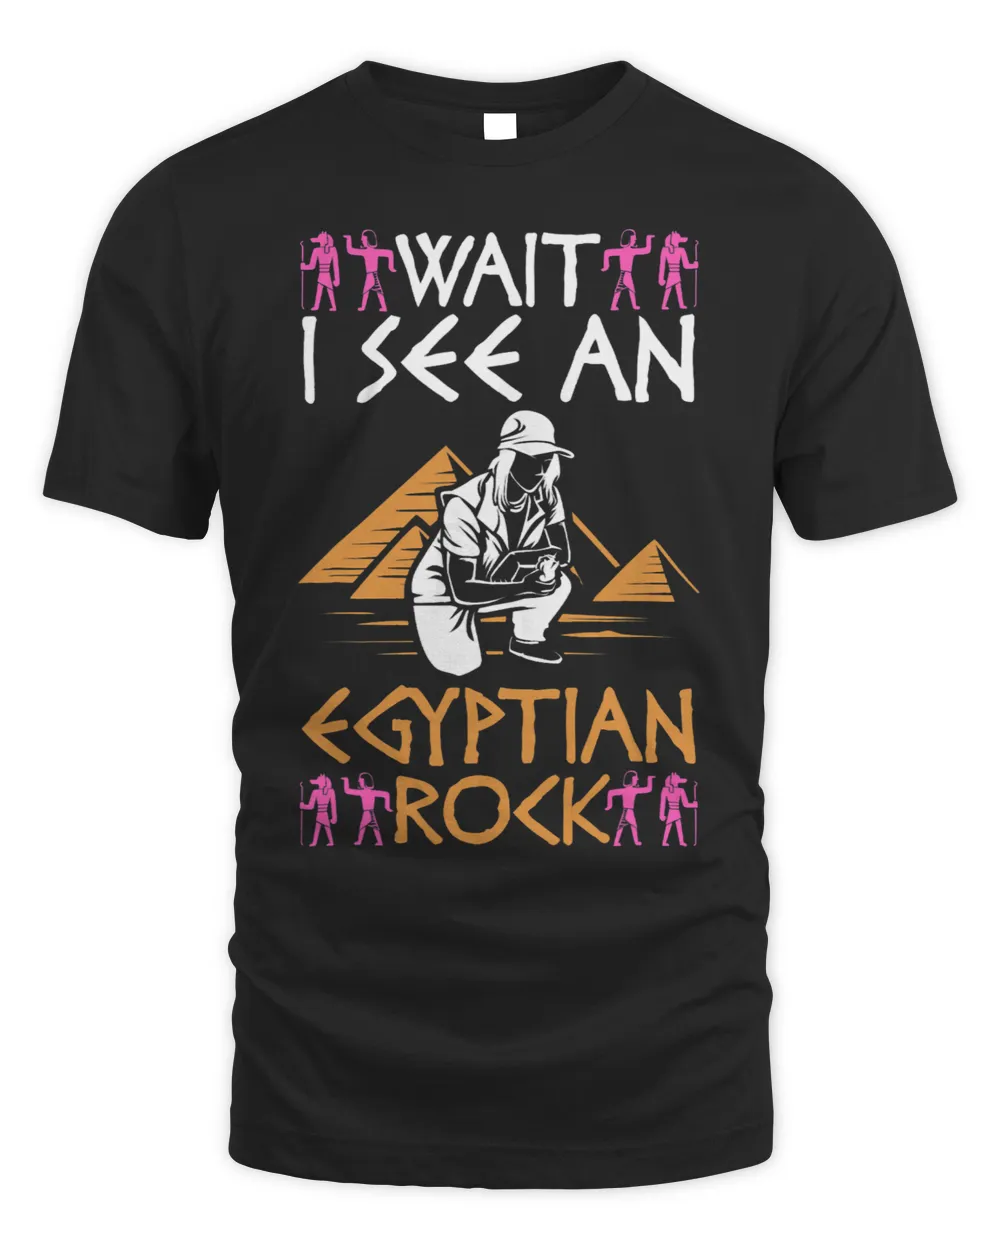 Archaeologist Ancient Egyptian Clothing Egyptian Archaeology 1